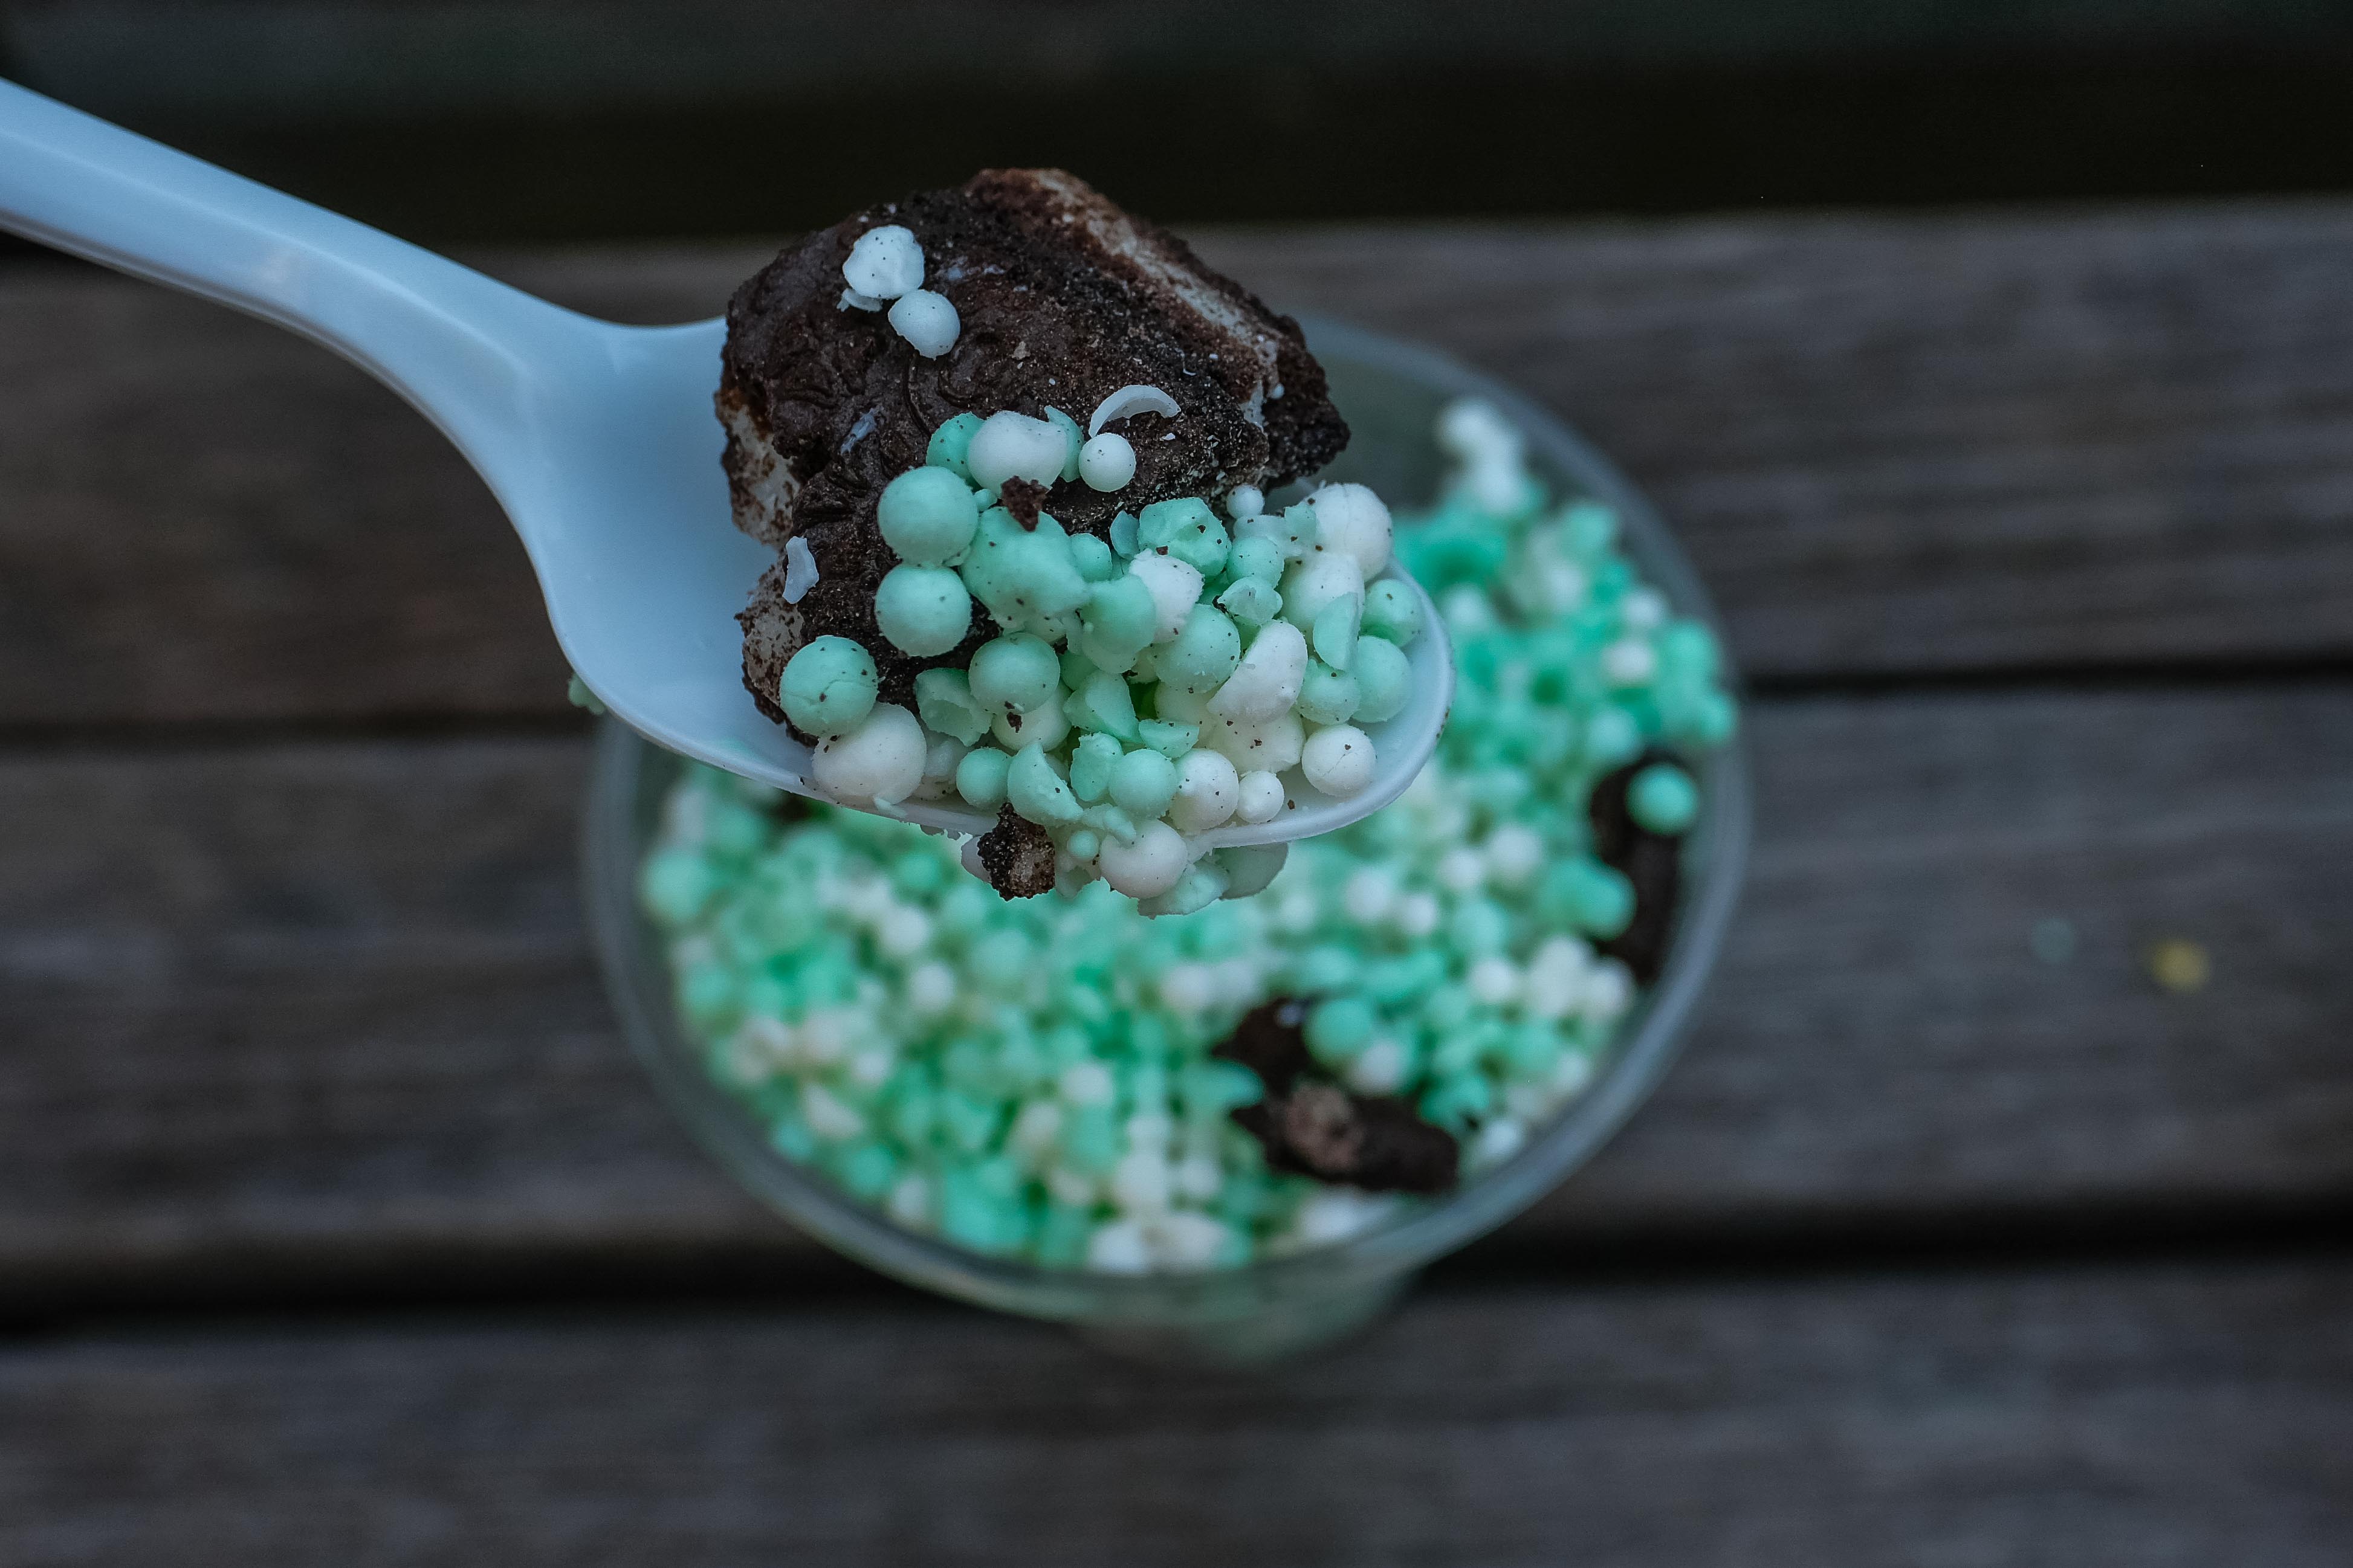 NYC's first Dippin' Dots store is now open